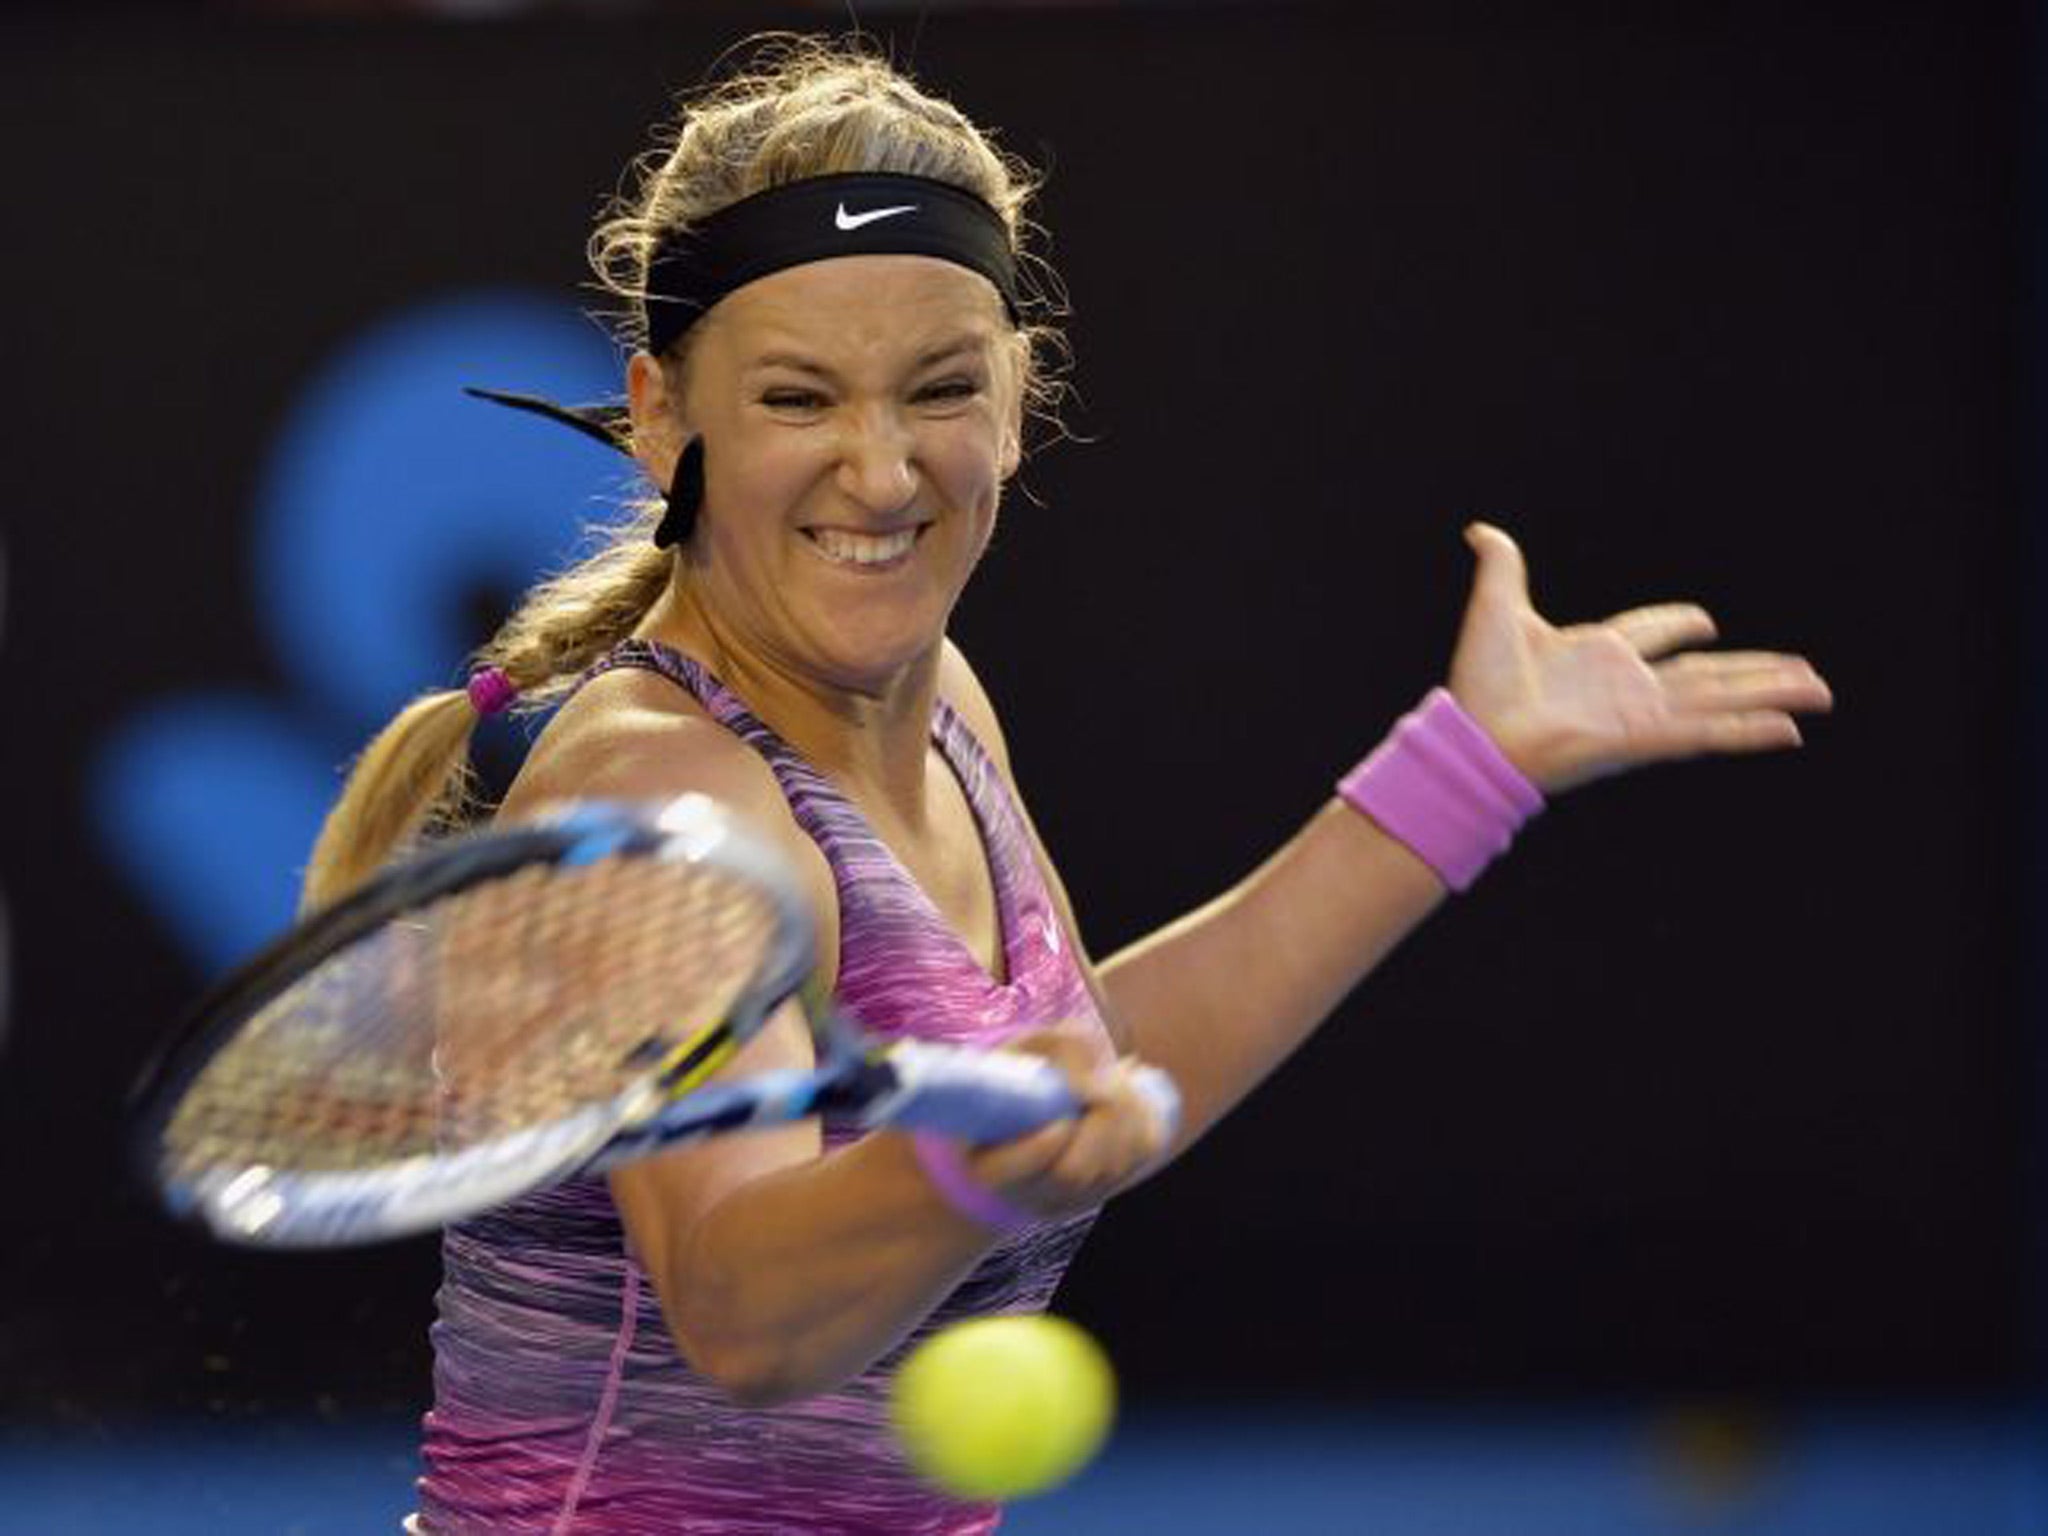 Azarenka broke unseeded Yvonne Meusburger's serve twice in the first four games and was rarely troubled